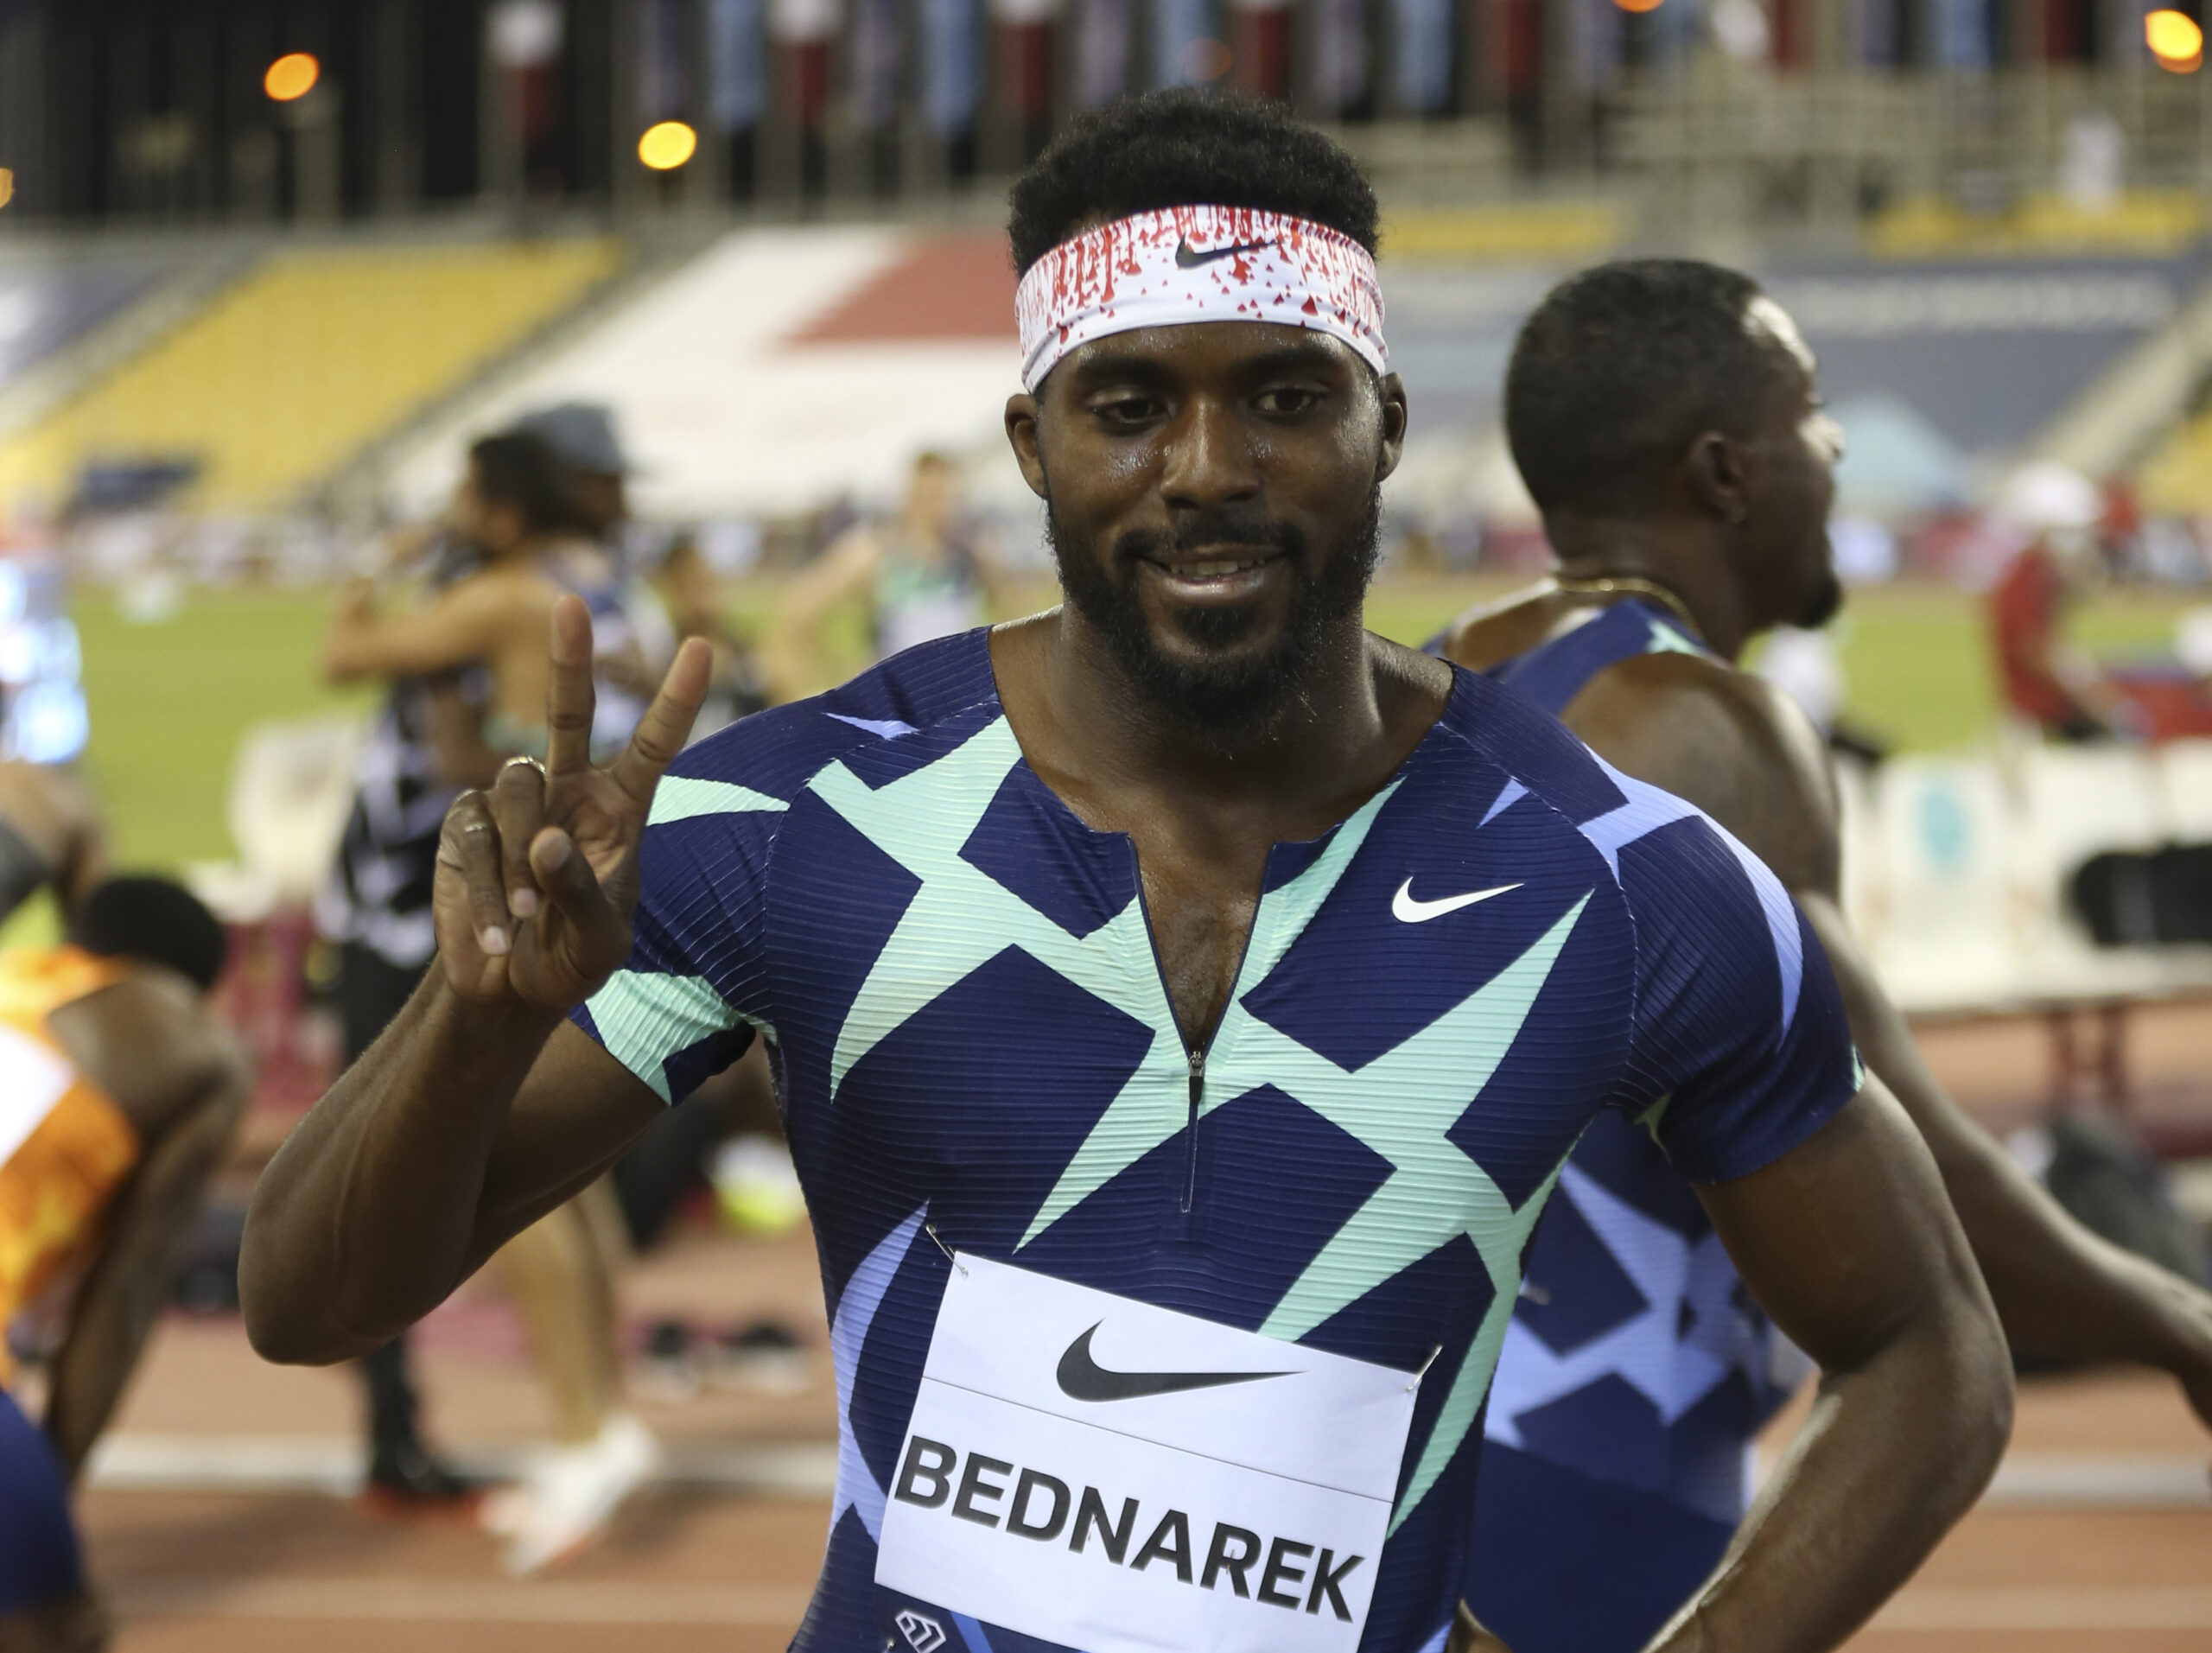 A man holds up two fingers celebrating a win in a track and field race